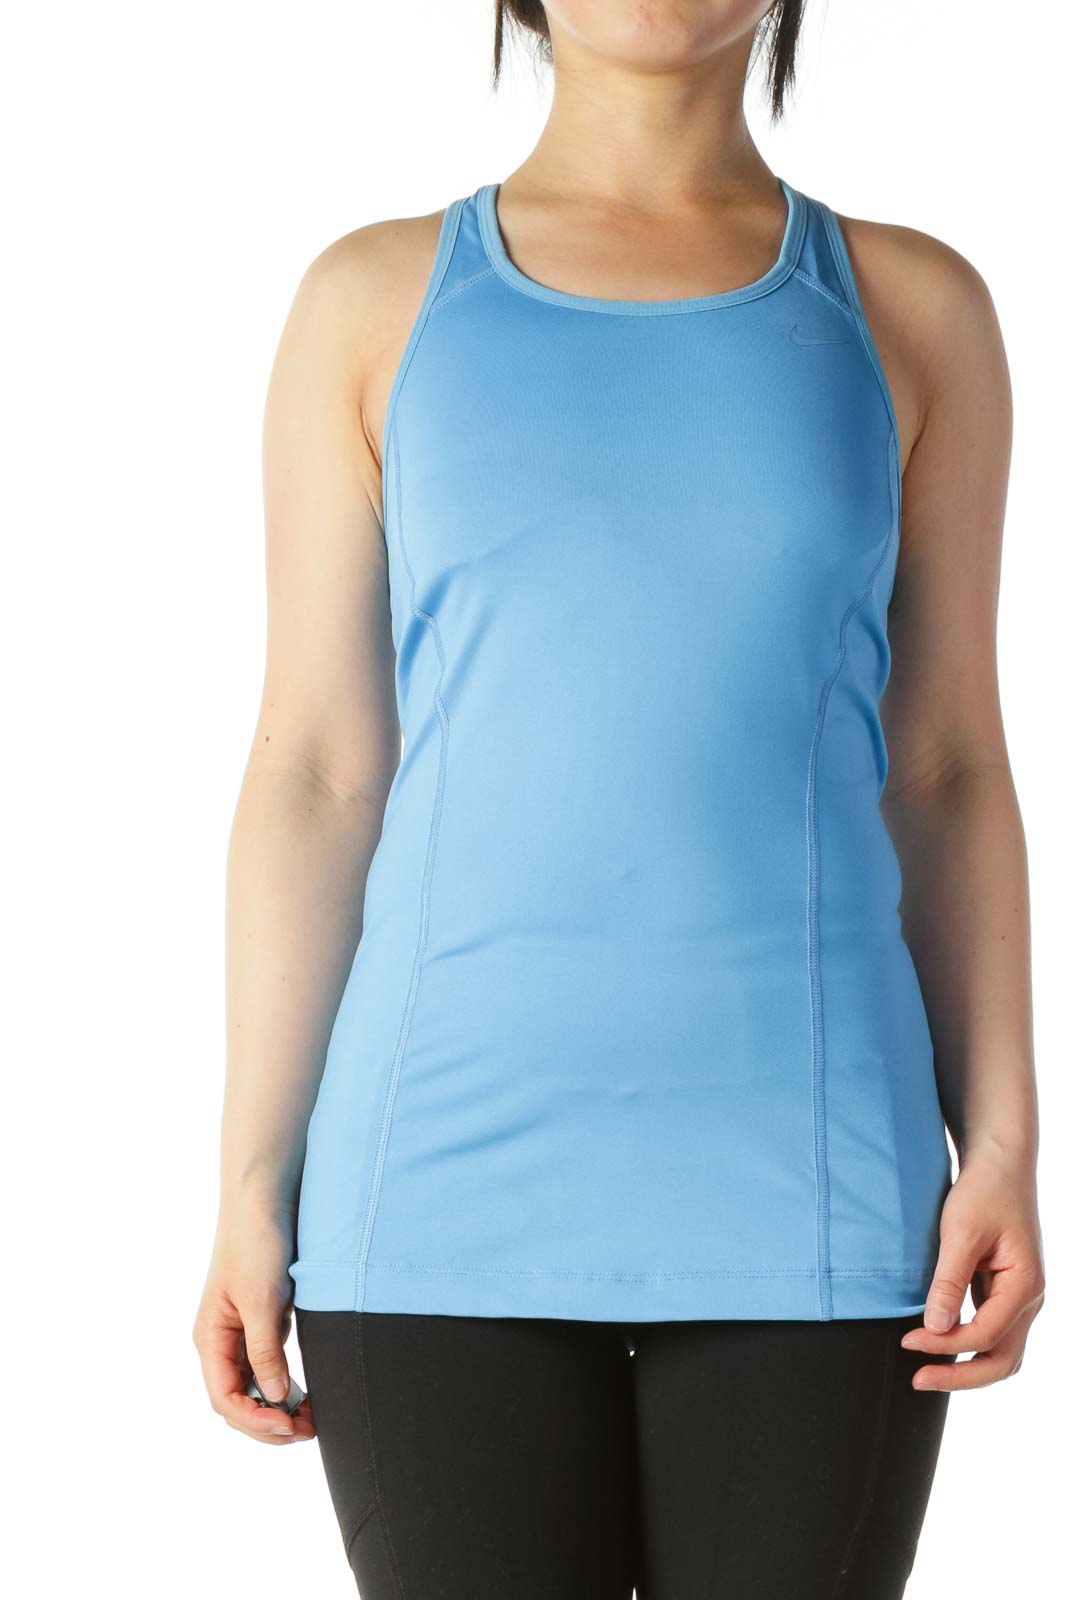 Nike - Light-Blue Racerback Activewear Top with Built-In Bra Polyester2  Spandex Polyester